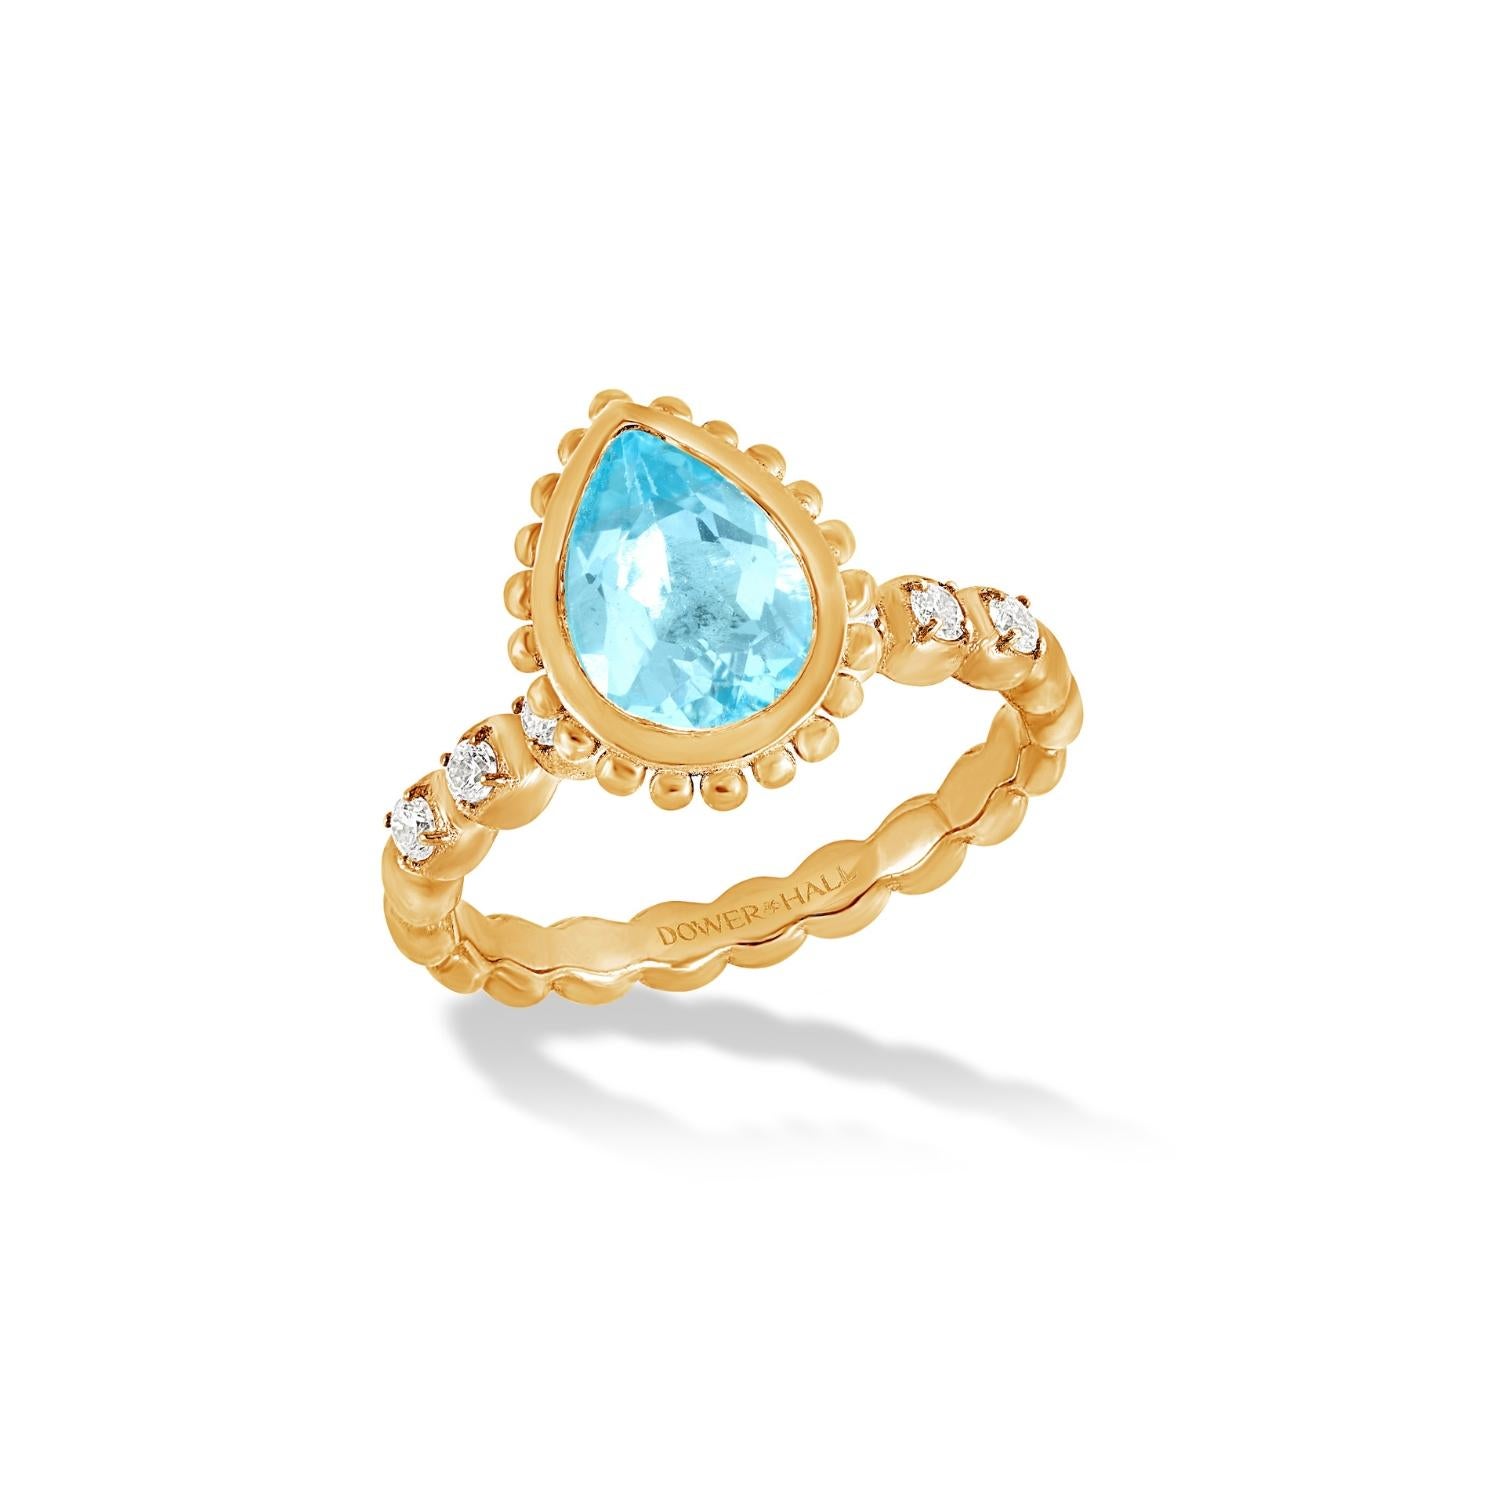 This dramatic and directional ring is set with a pear cut Blue Topaz in 14k yellow gold featuring granulated balls around the outside of the rub-over setting and with diamonds claw set in the dotty style band. Inspired by creatures of the coral